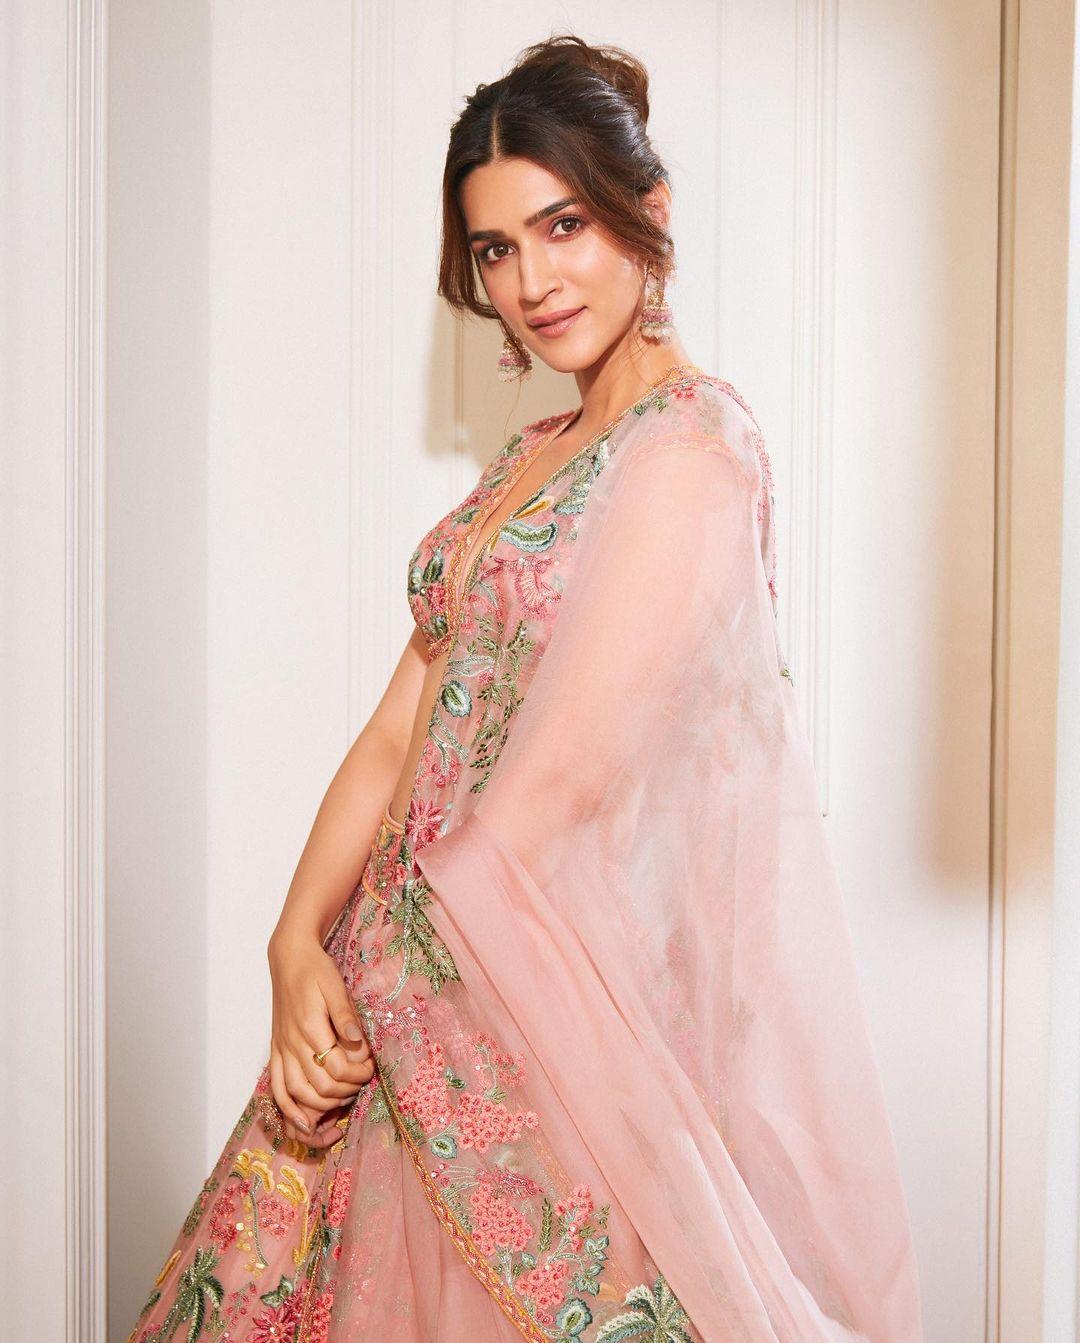 It is Holi, and of course, you want to wear something colorful; worry not, we got you covered. In this look, Kriti wore a stunning pink lehenga with colourful embroidery on it